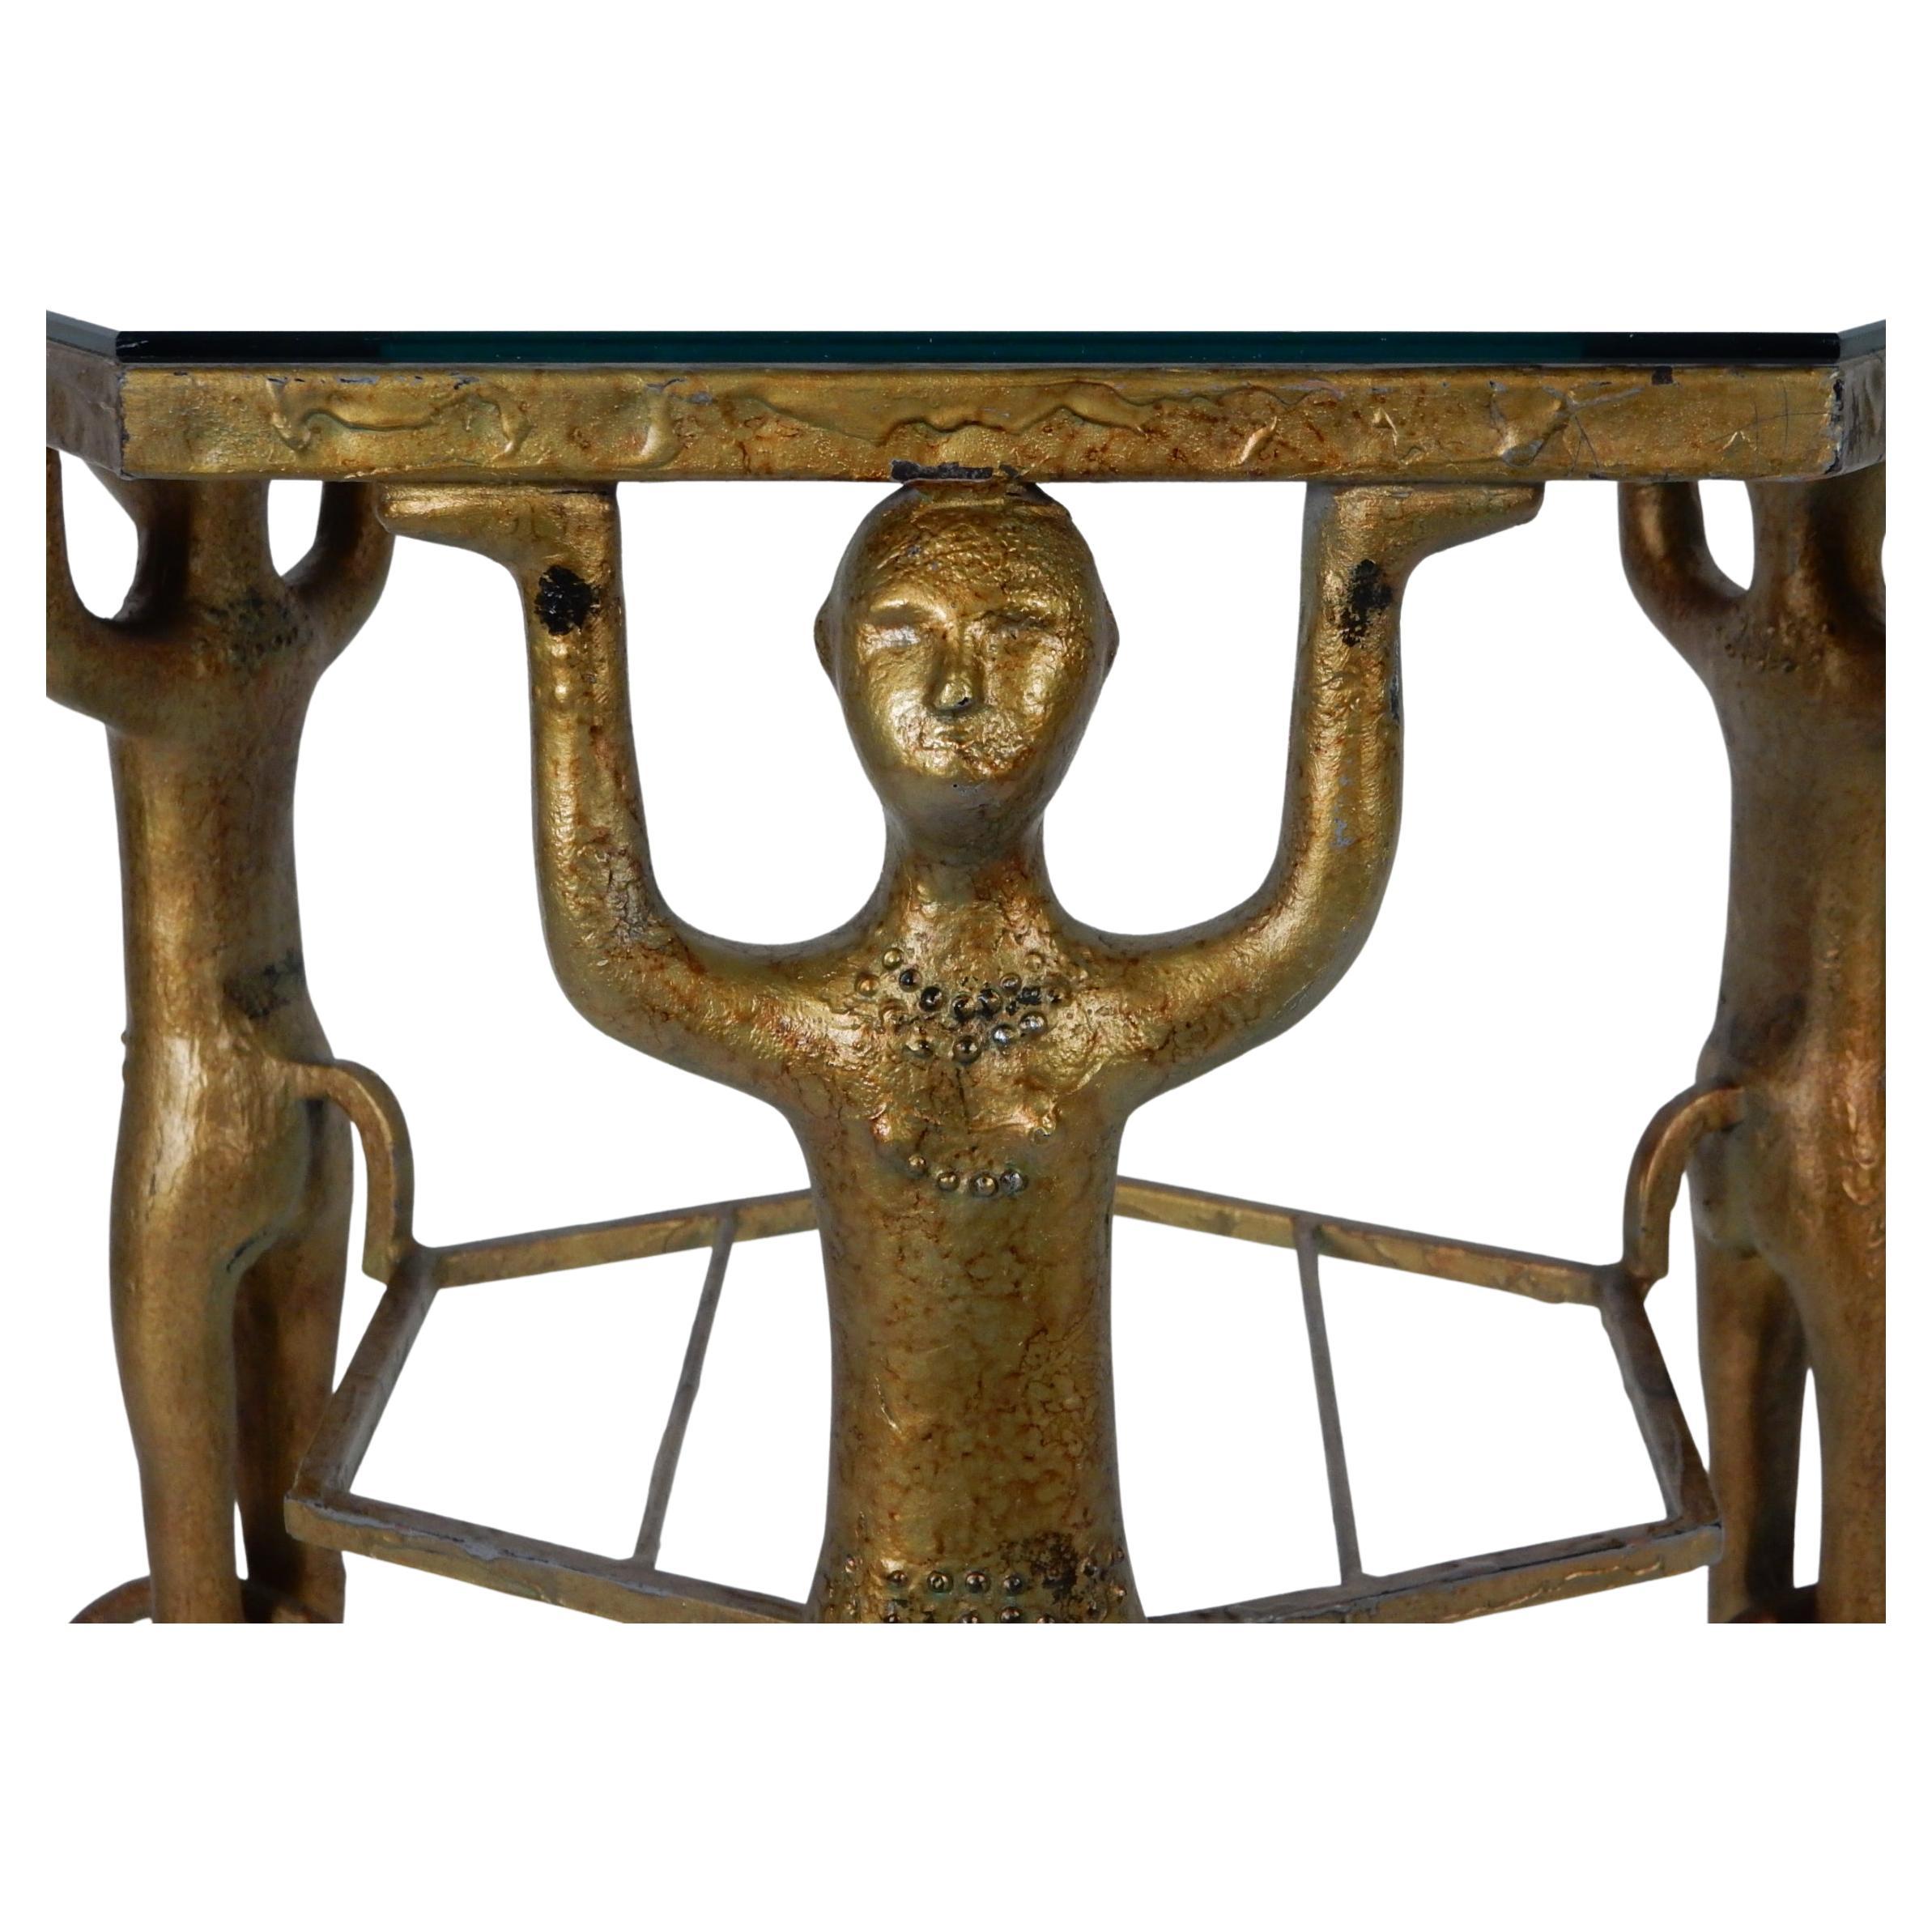 Mid-Century Modern Androgynous Figural Cast Iron Gueridon Table after Alberto Giacometti For Sale